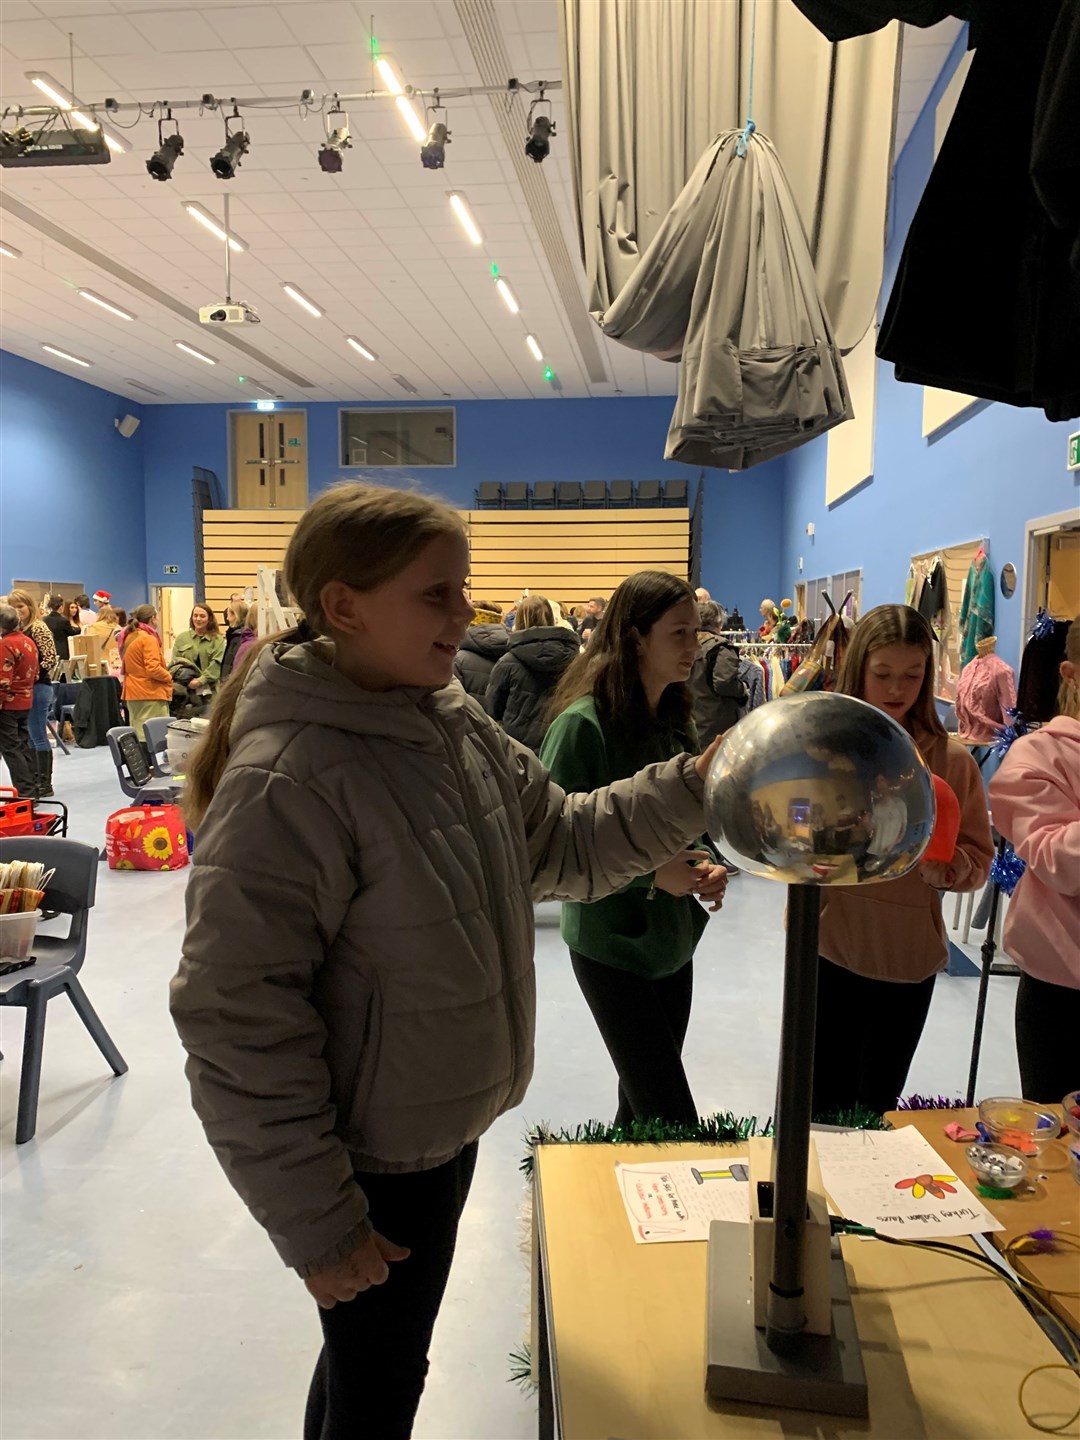 The Dingwall Academy Christmas fair was well attended and offered a showcase to scores of local groups.